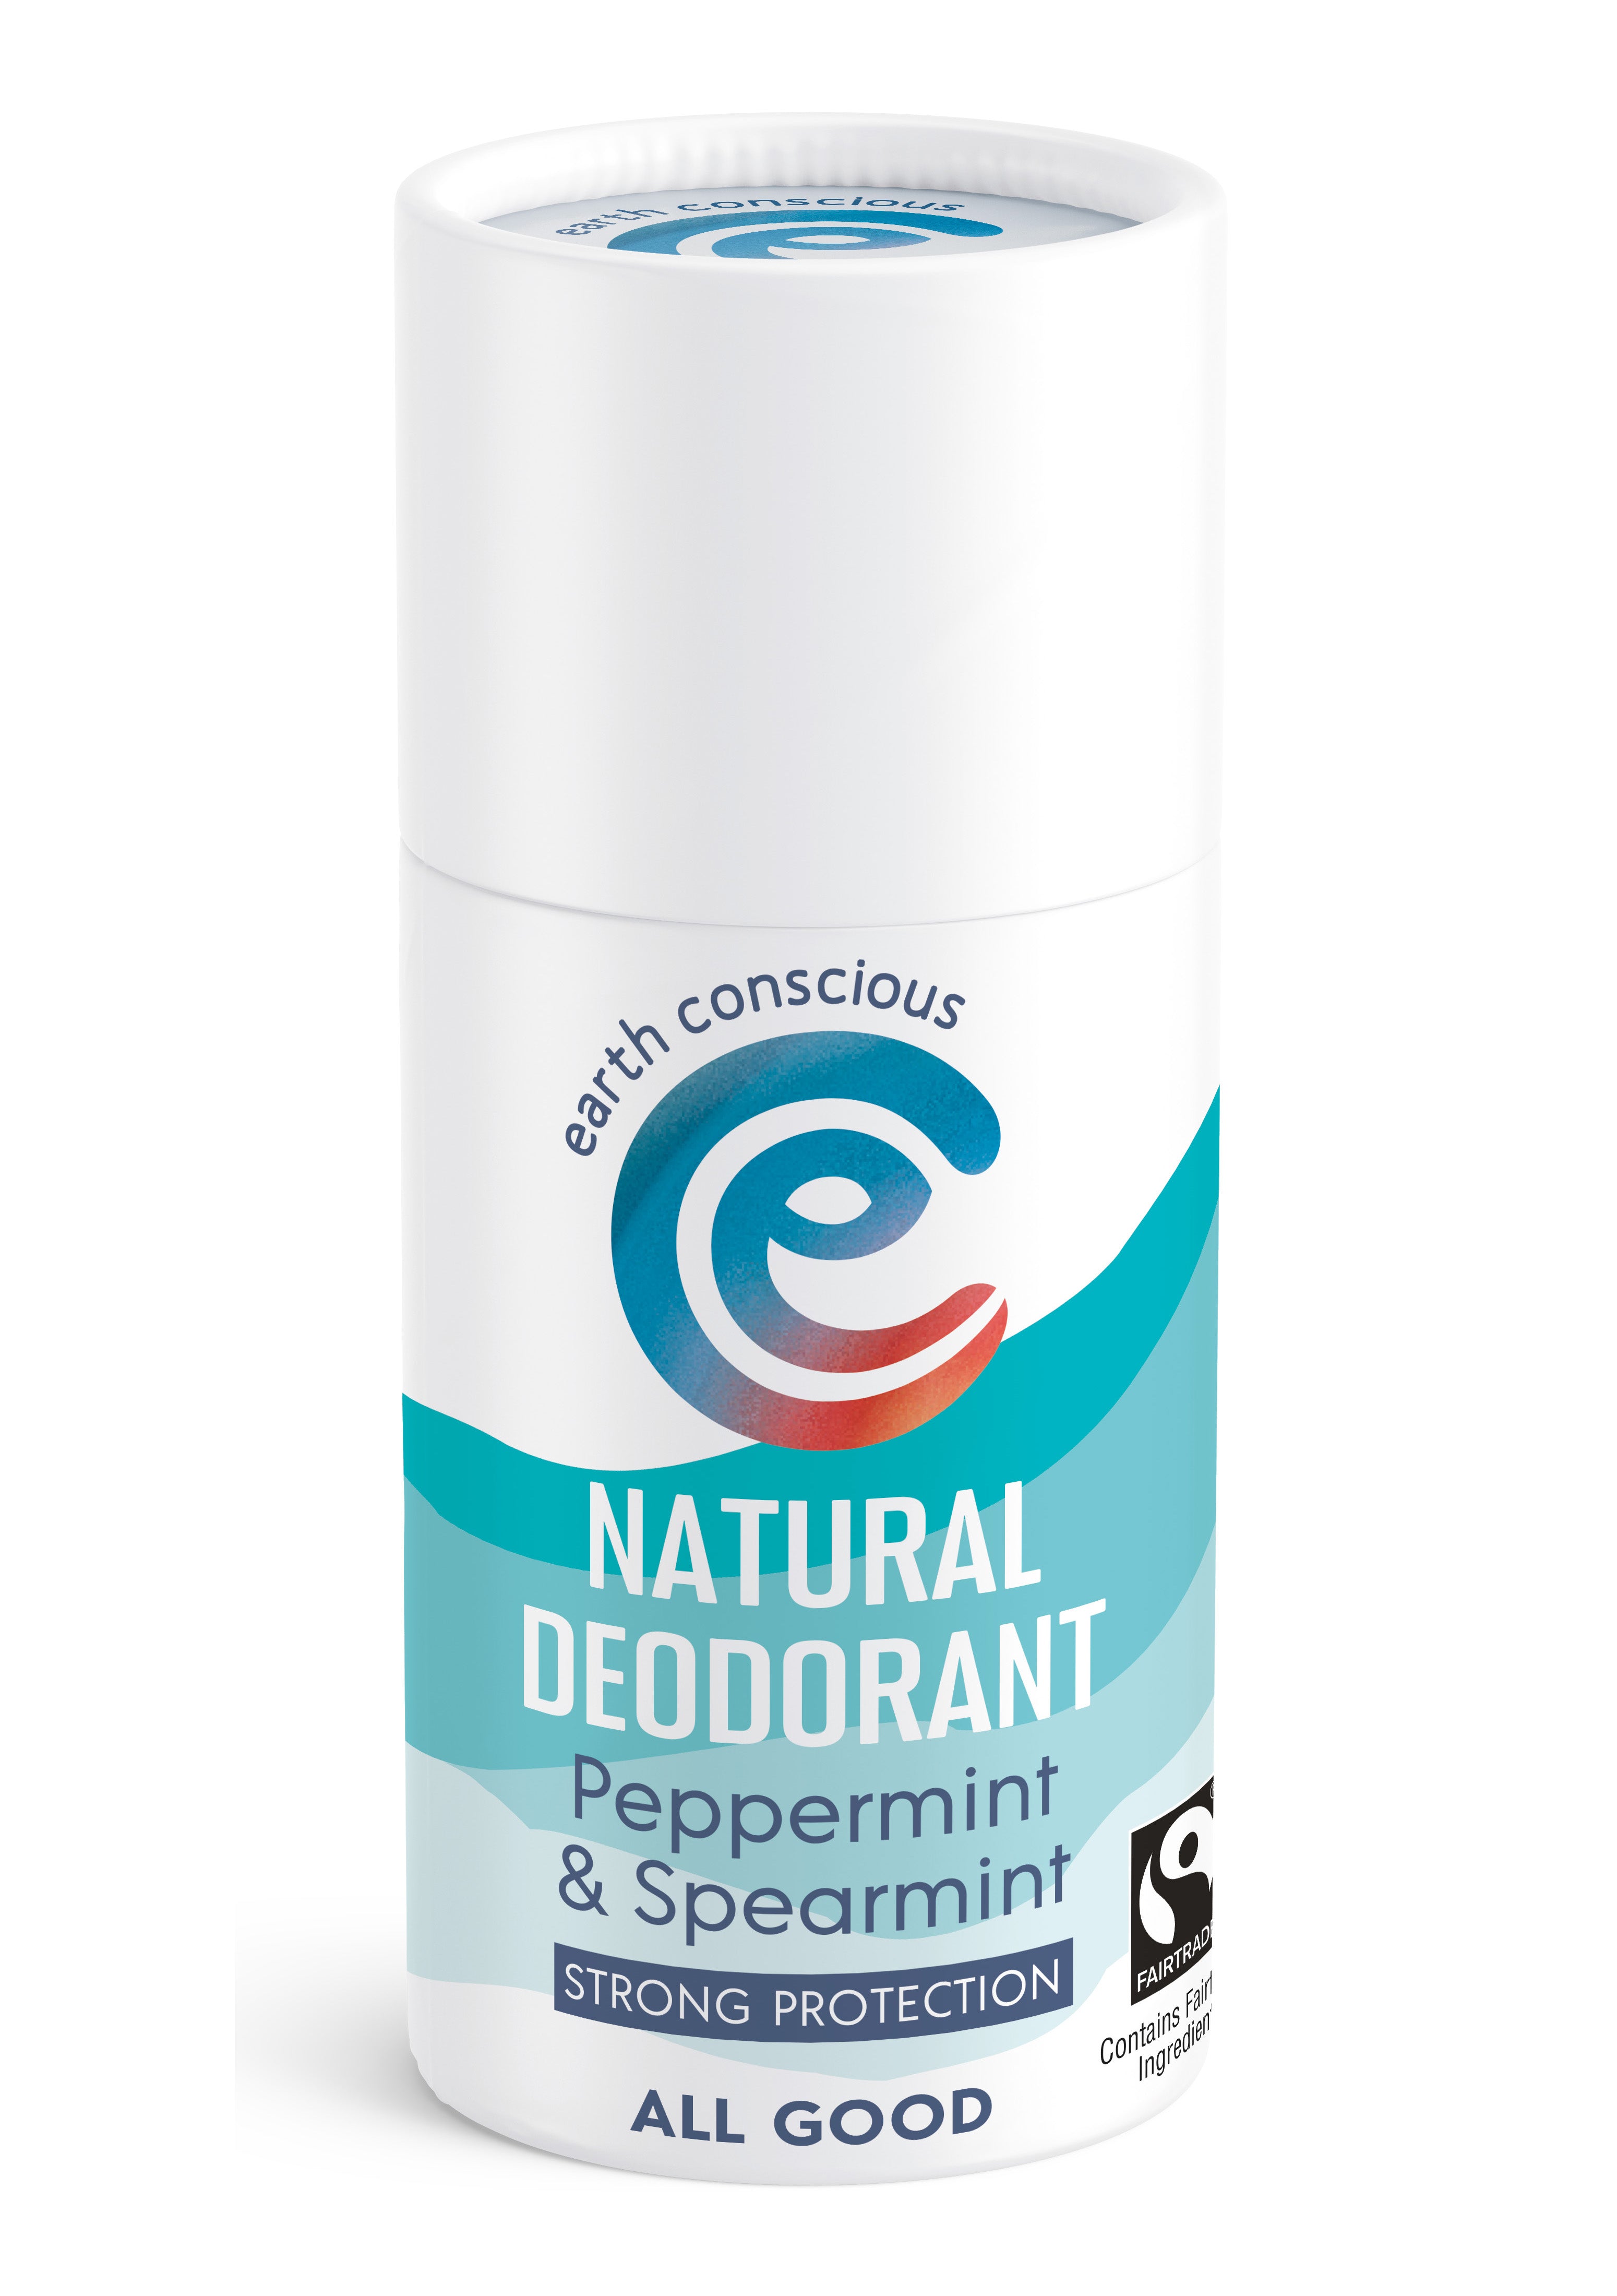 MINT STRONG PROTECTION 60g Natural Deodorant Stick – Earth Conscious